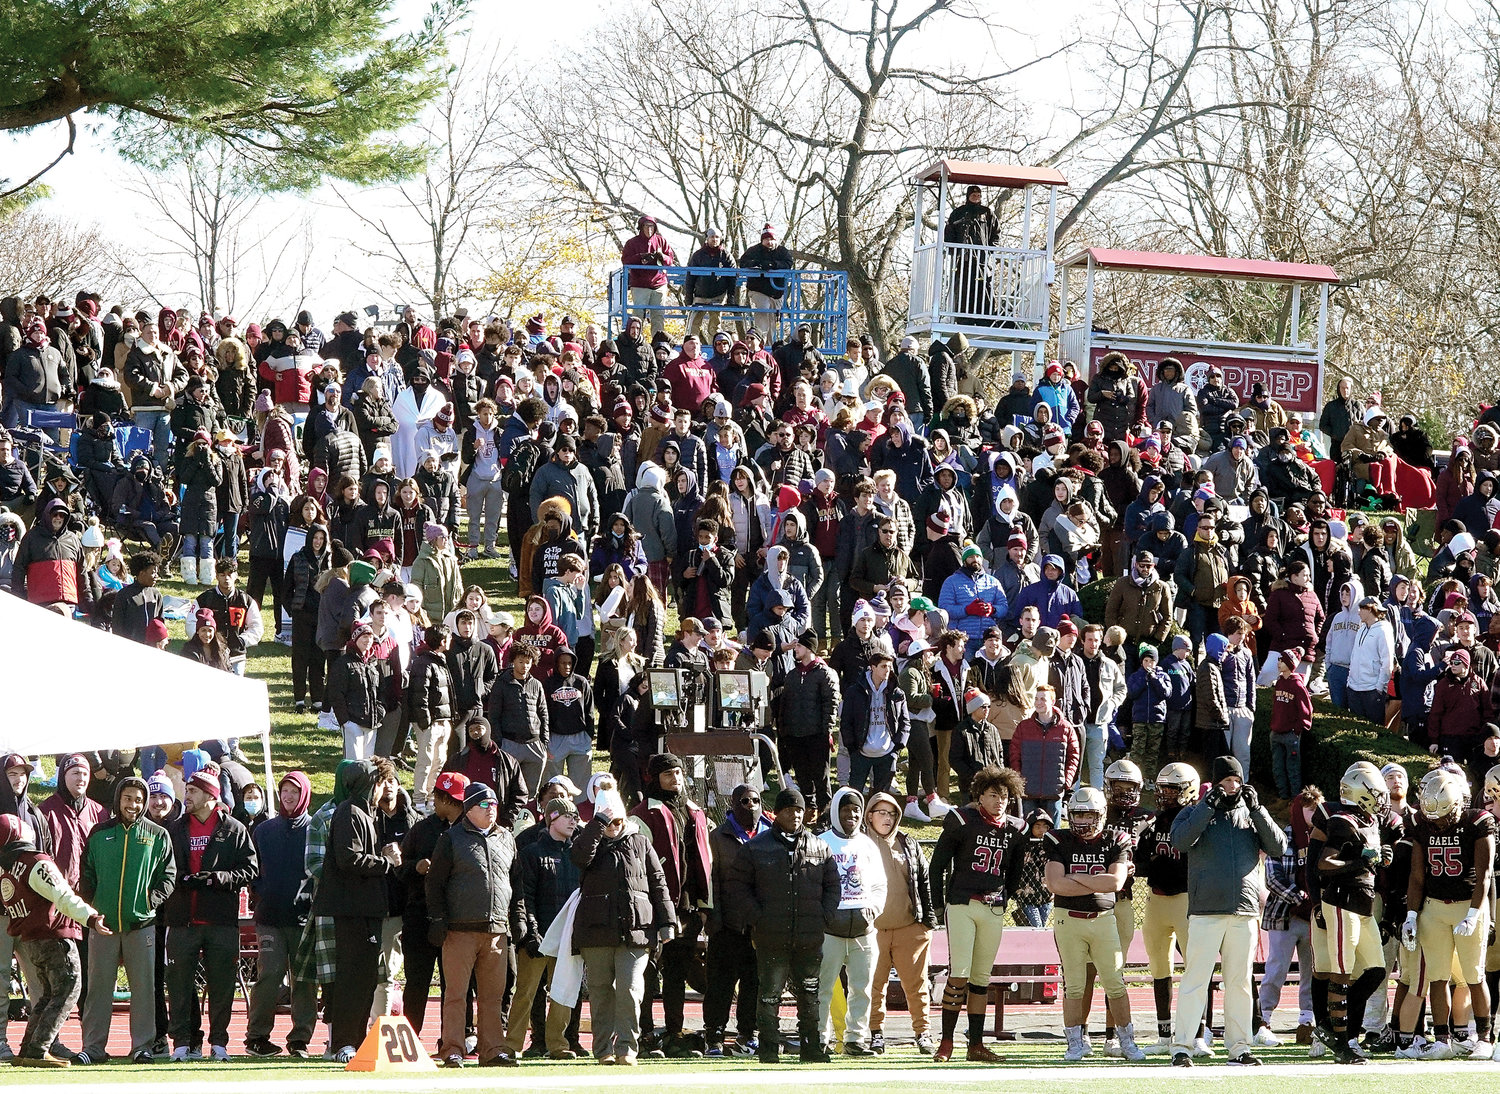 A large crowd watches the game from the hill overlooking Iona Prep’s Wellington T. Mara Field, named after the late owner of the New York Giants.